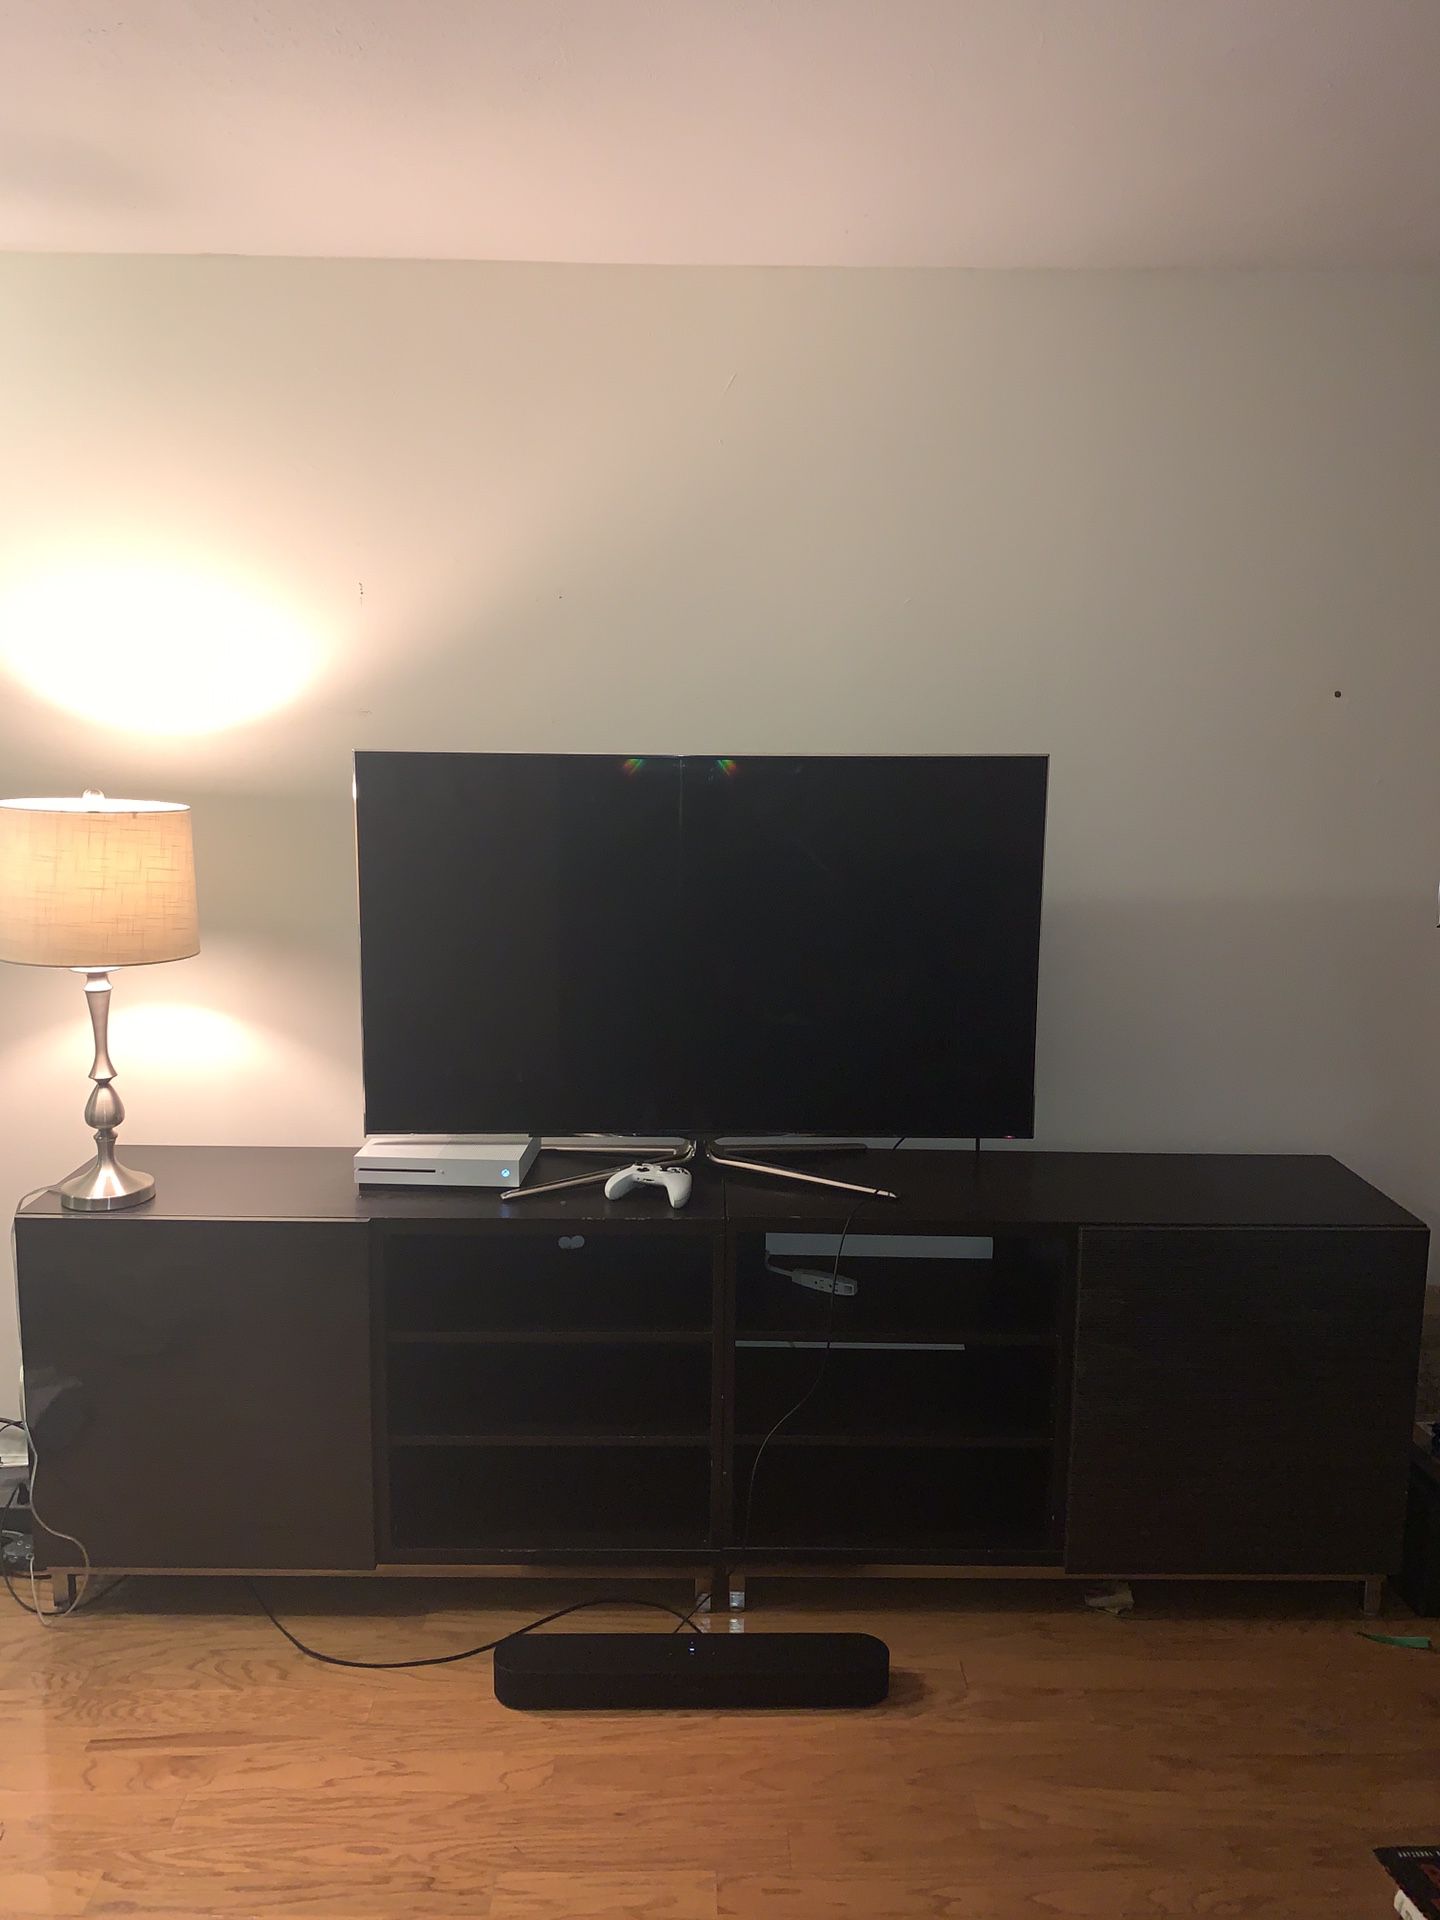 Symmetrical Entertainment center with storage doors and shelves